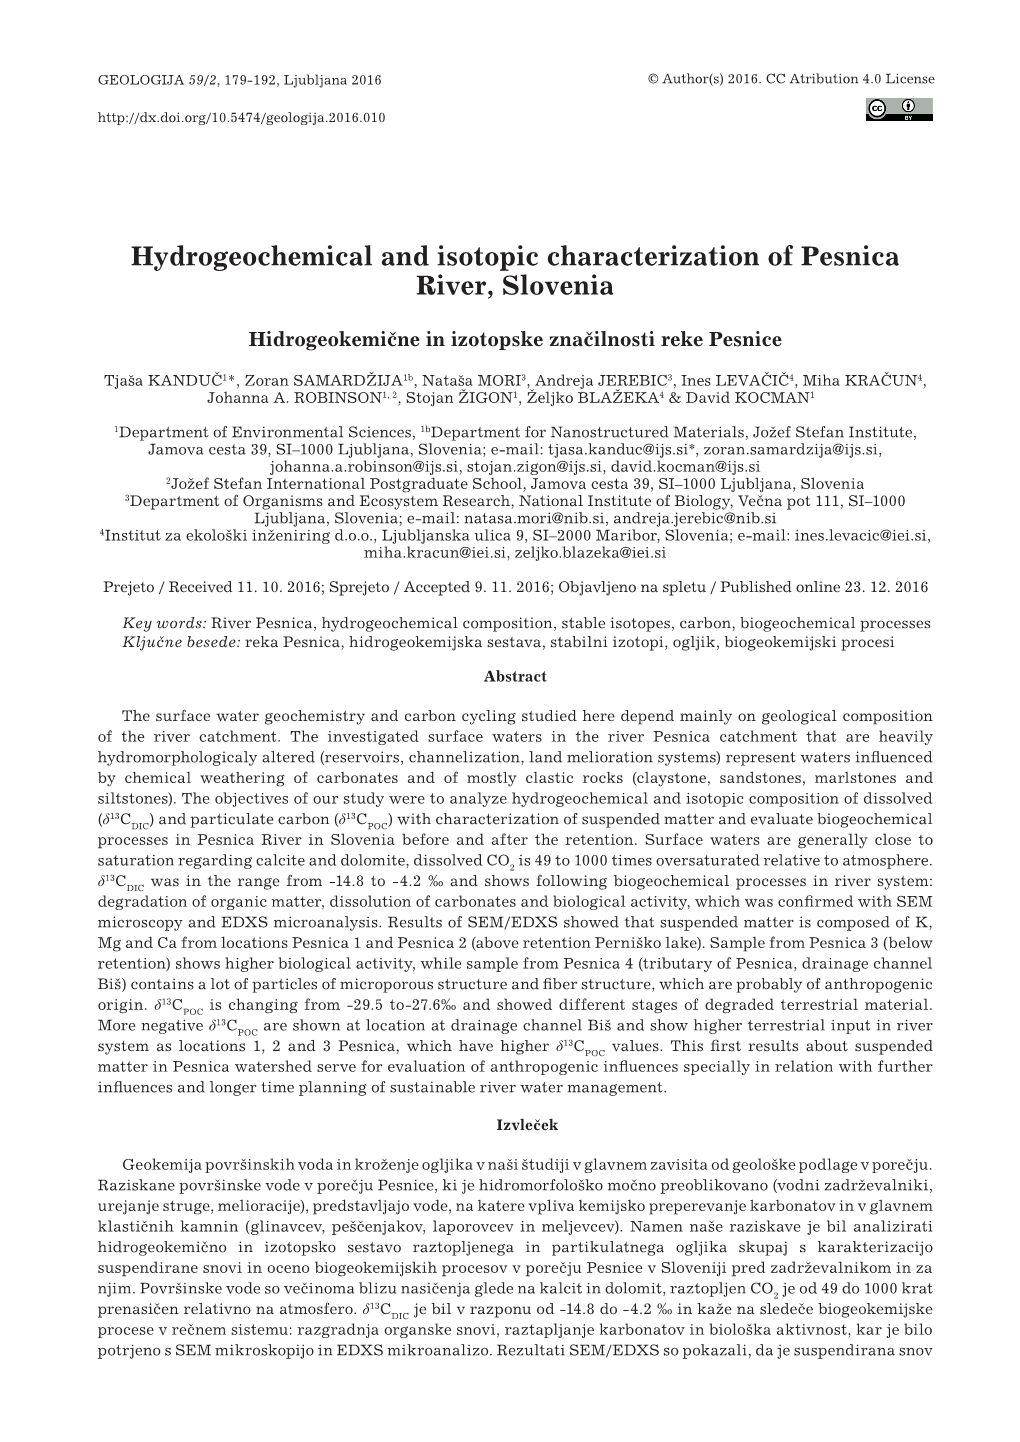 Hydrogeochemical and Isotopic Characterization of Pesnica River, Slovenia